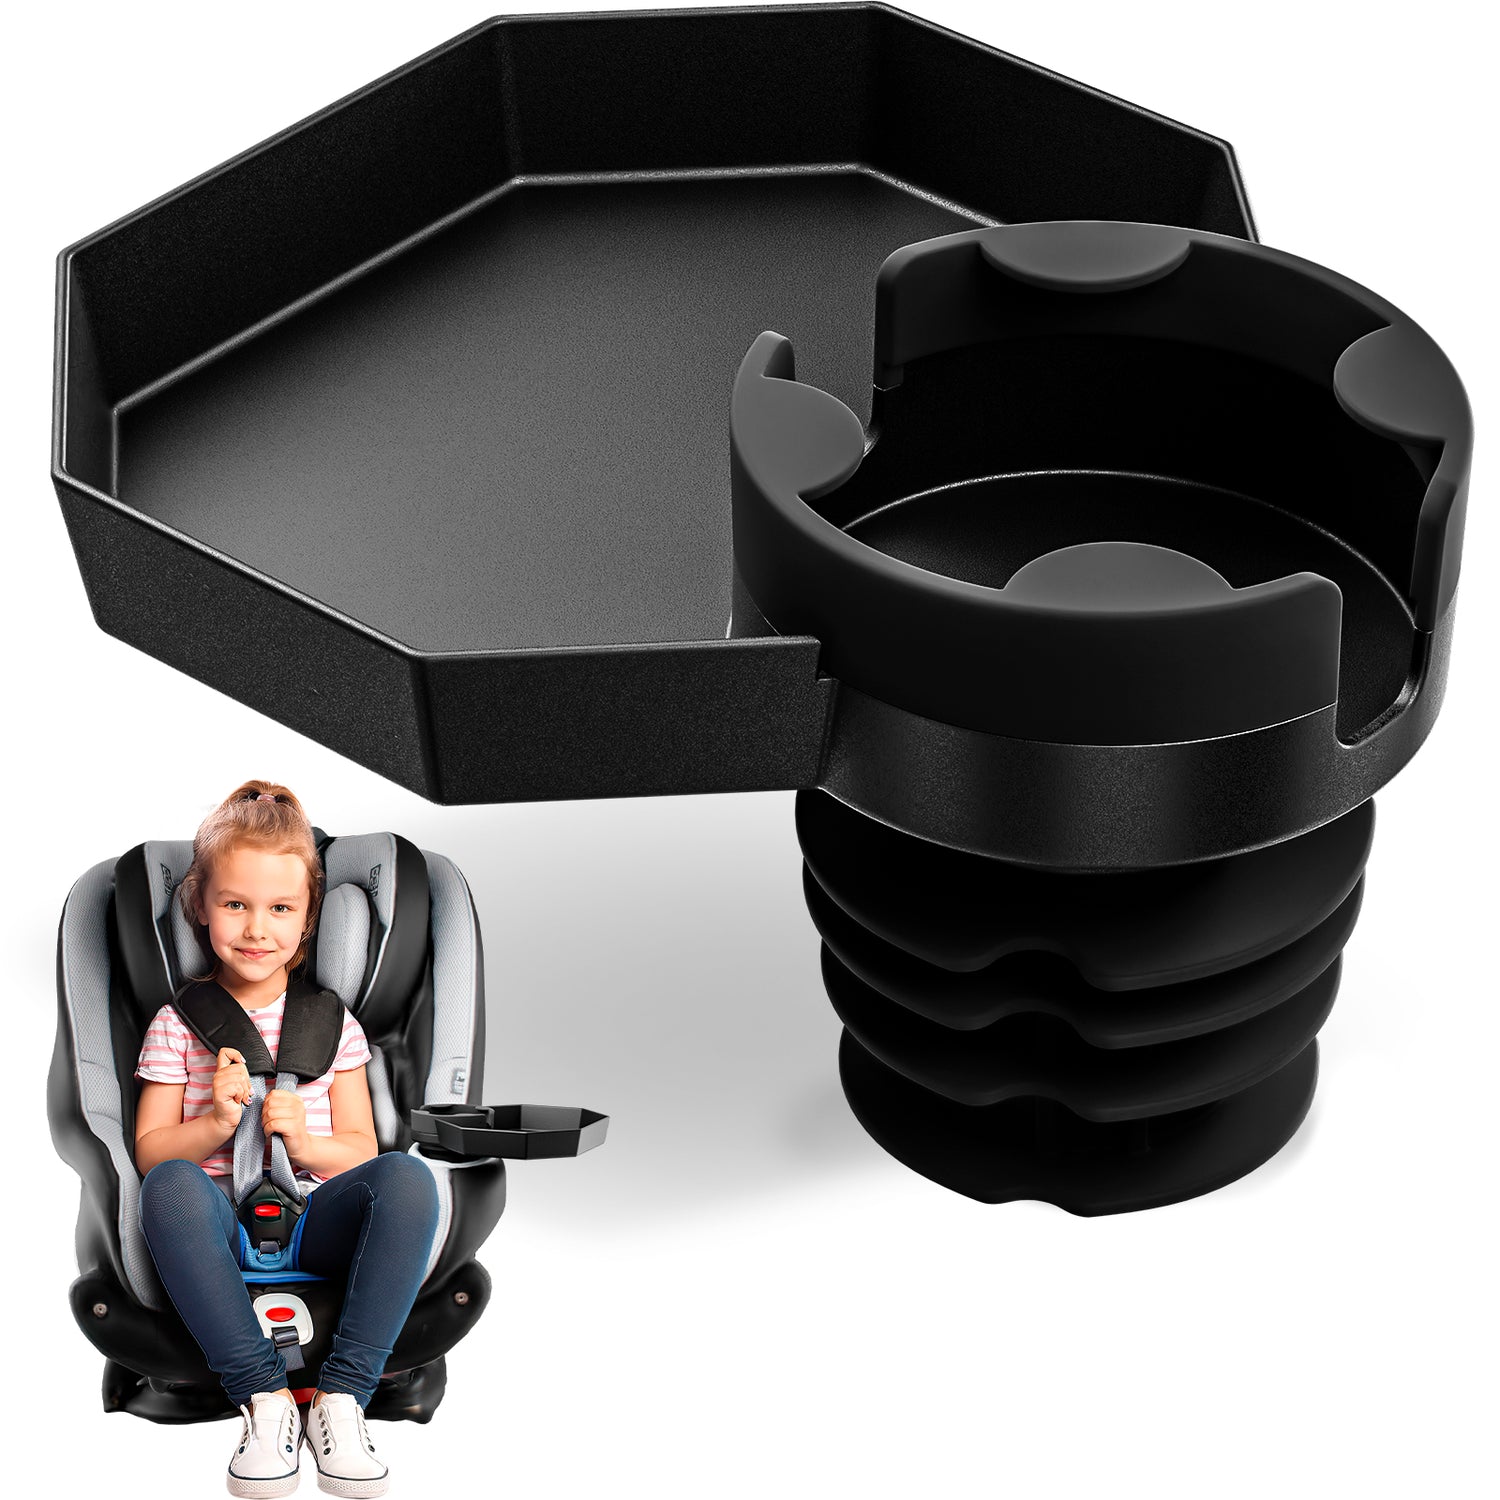 Kids Travel Tray - Car Seat Cup Holder Tray Large Base